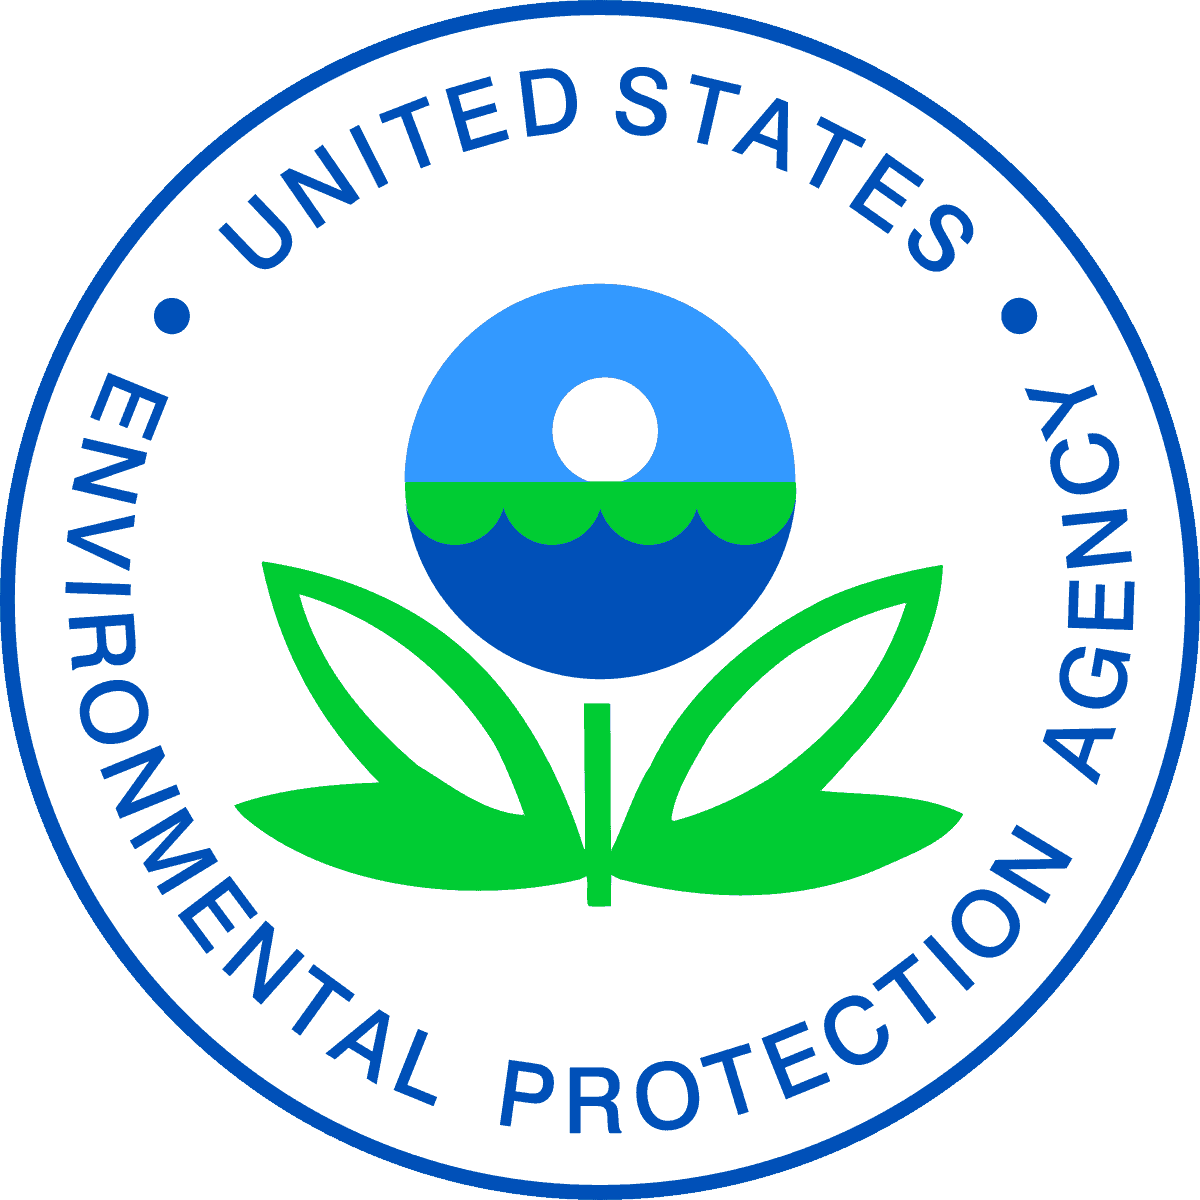 EPA ISSUES EMERGENCY WAIVER PERMITTING THE SUMMERTIME SALE OF E15